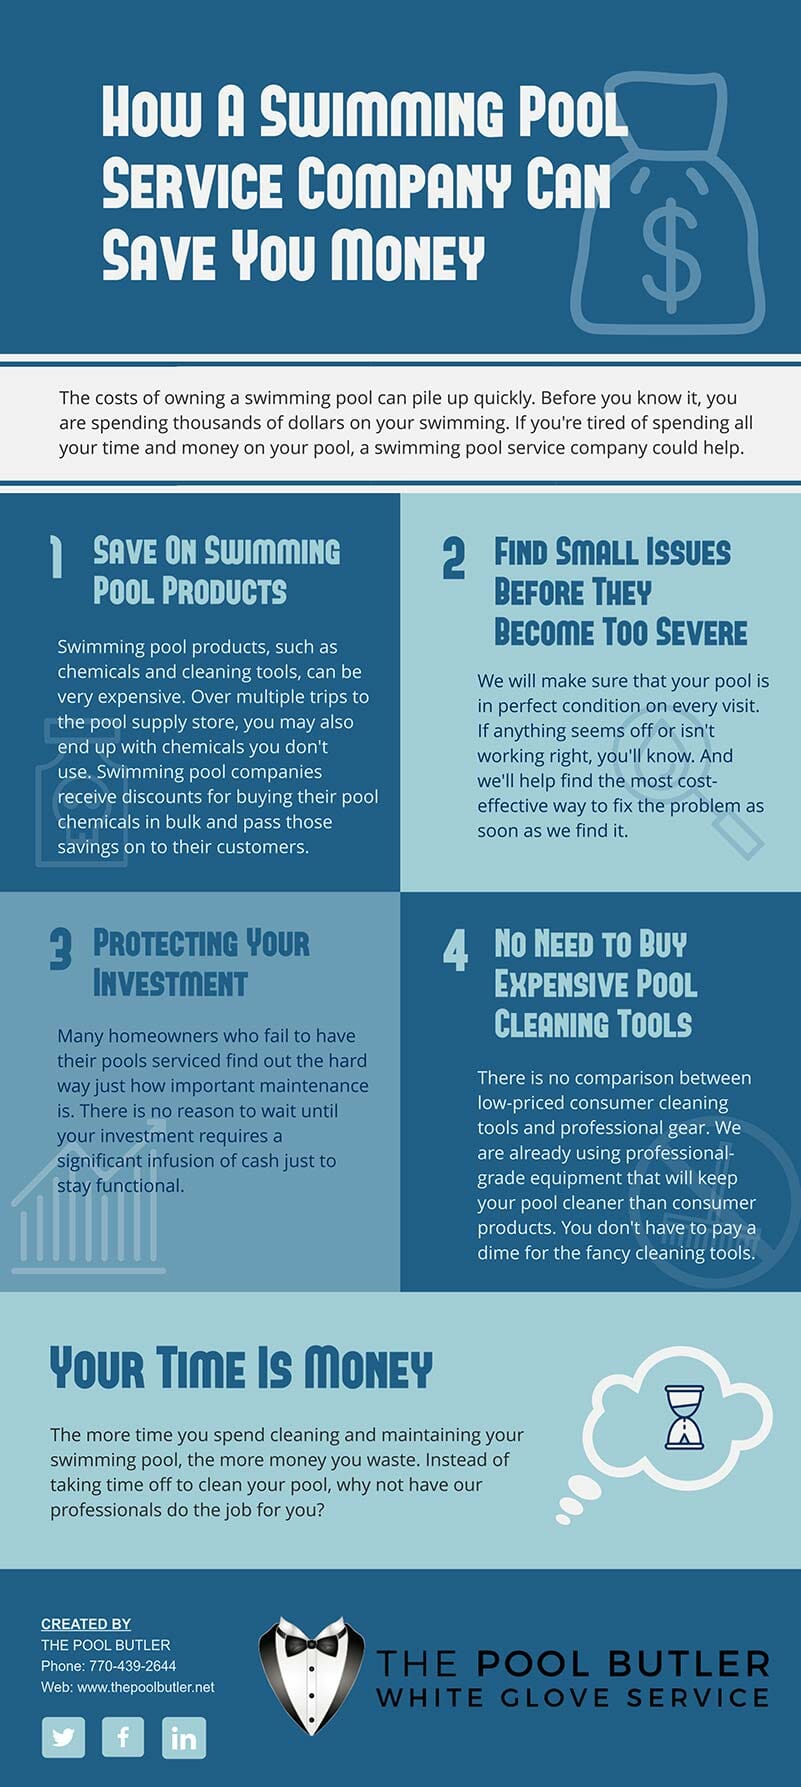 How A Swimming Pool Service Company Can Save You Money [infographic]